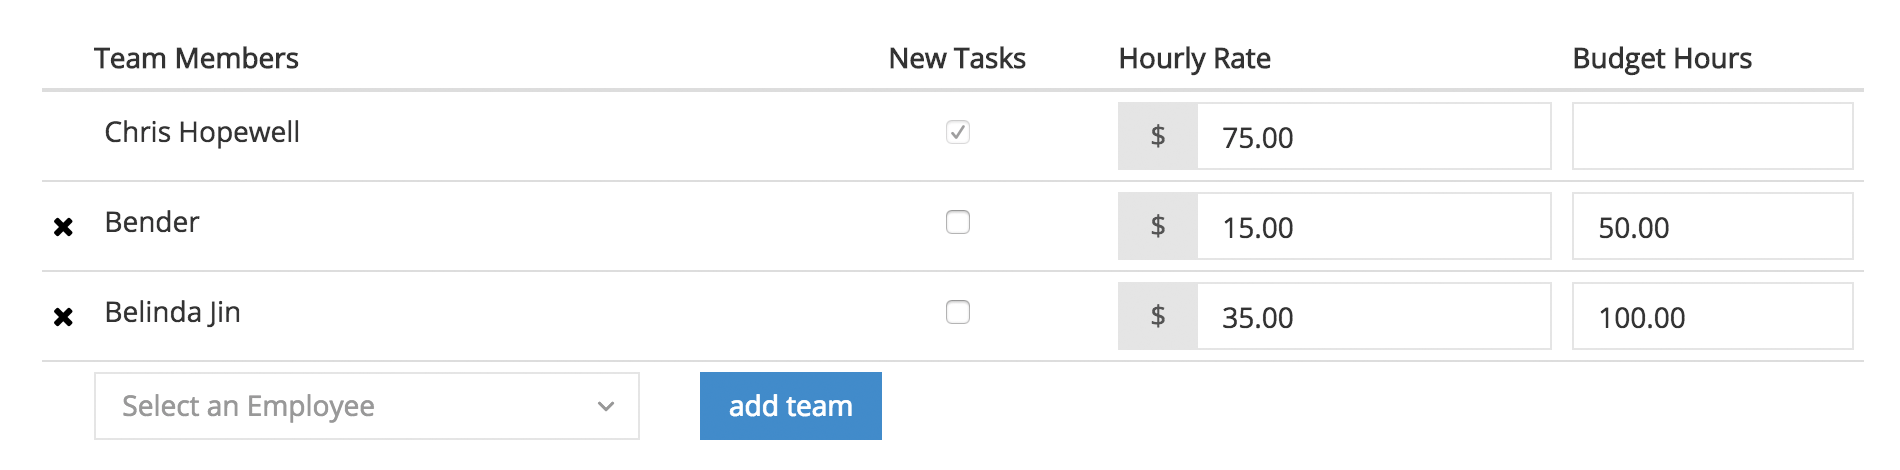 Time Tracking for Teams